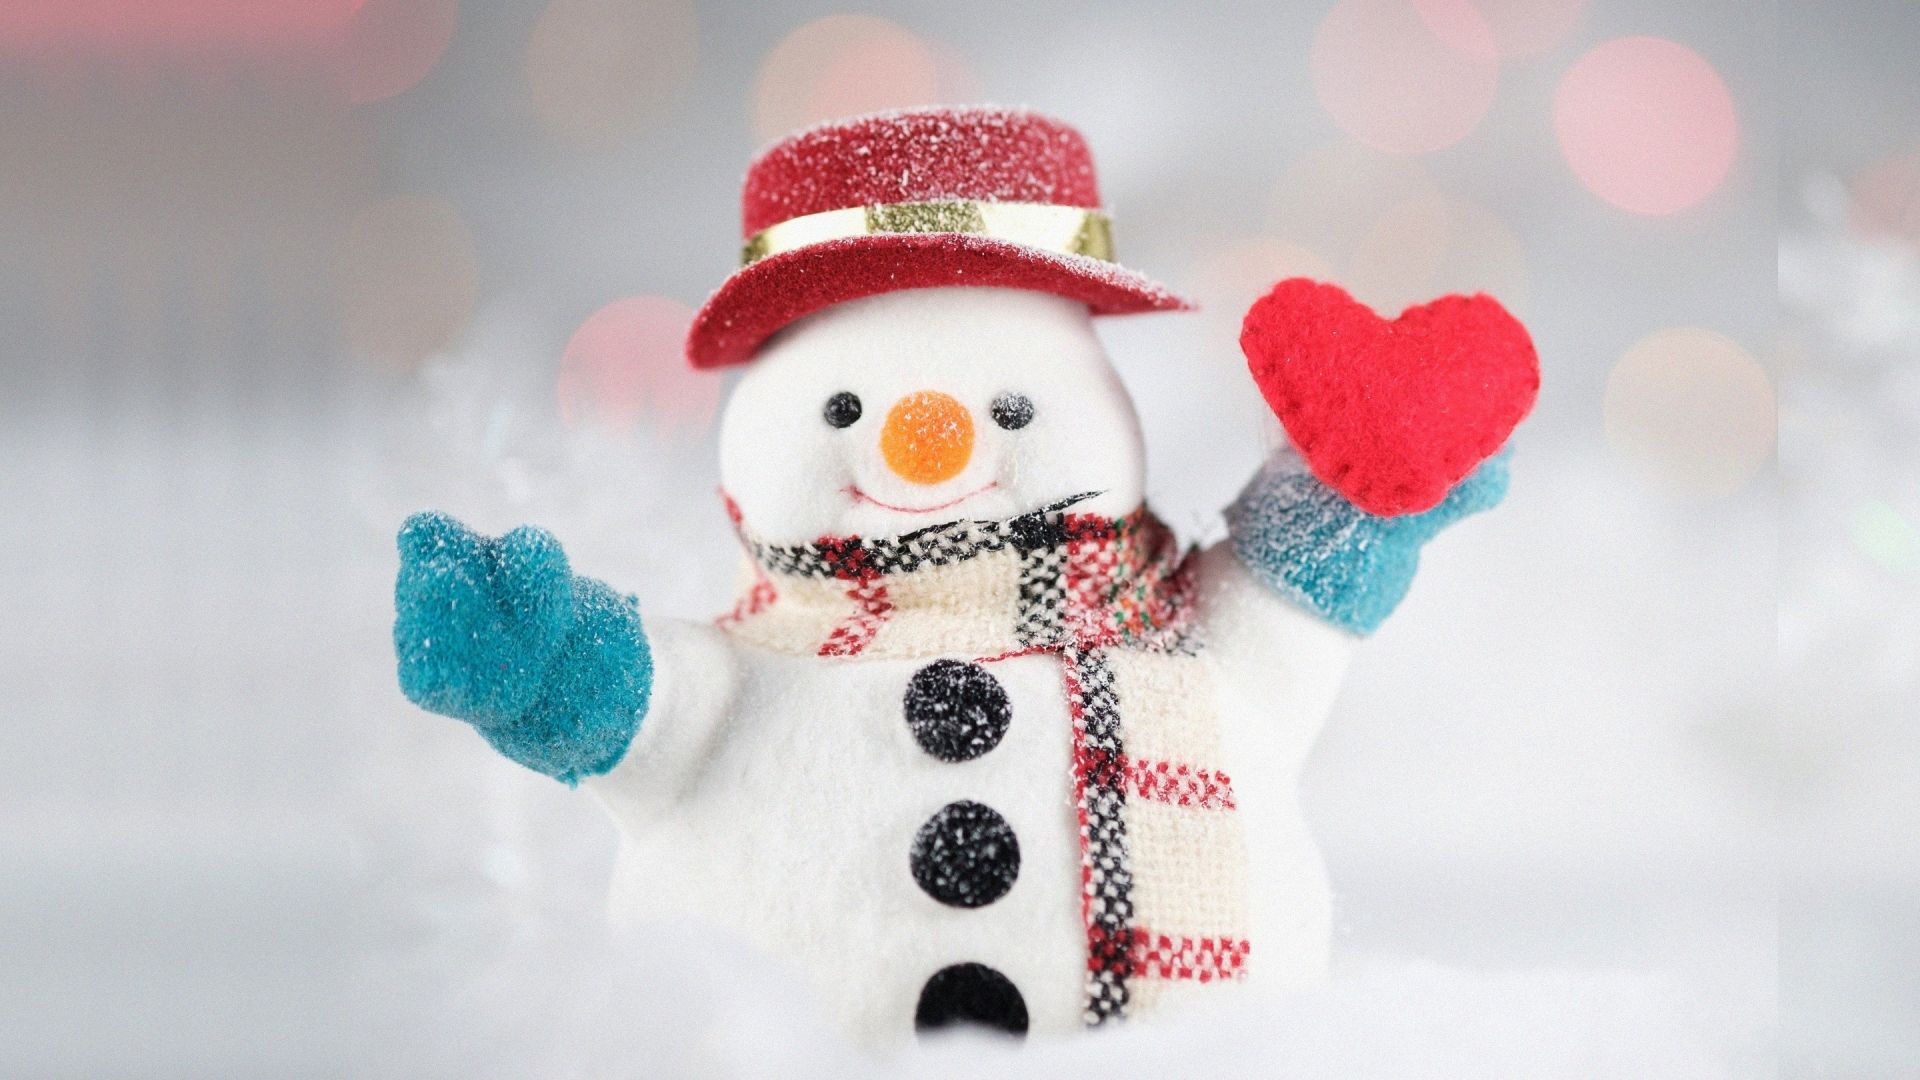 Desktop wallpapers snowman, cute, snowfall, christmas, hd image, picture, background, 02a1b7